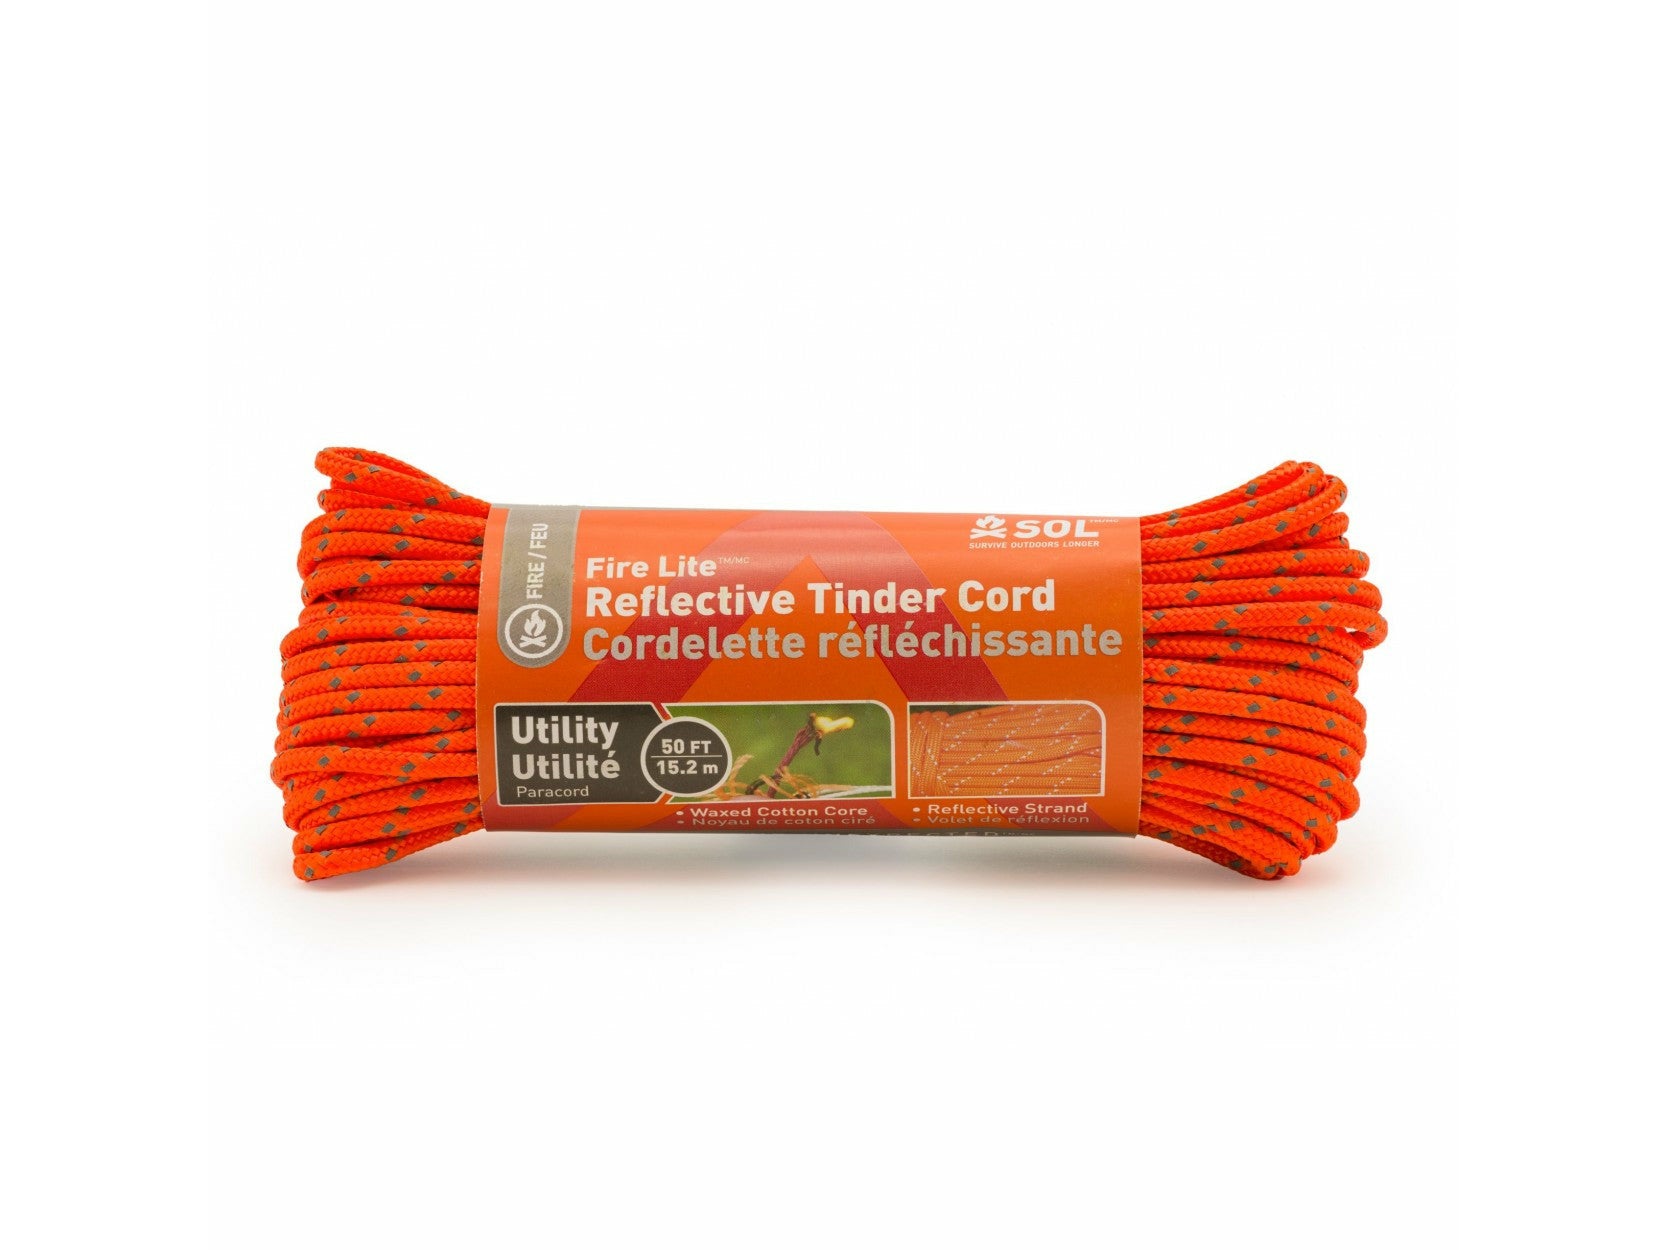 SOL Fire Lite Utility Reflective Tinder Cord 50 ft